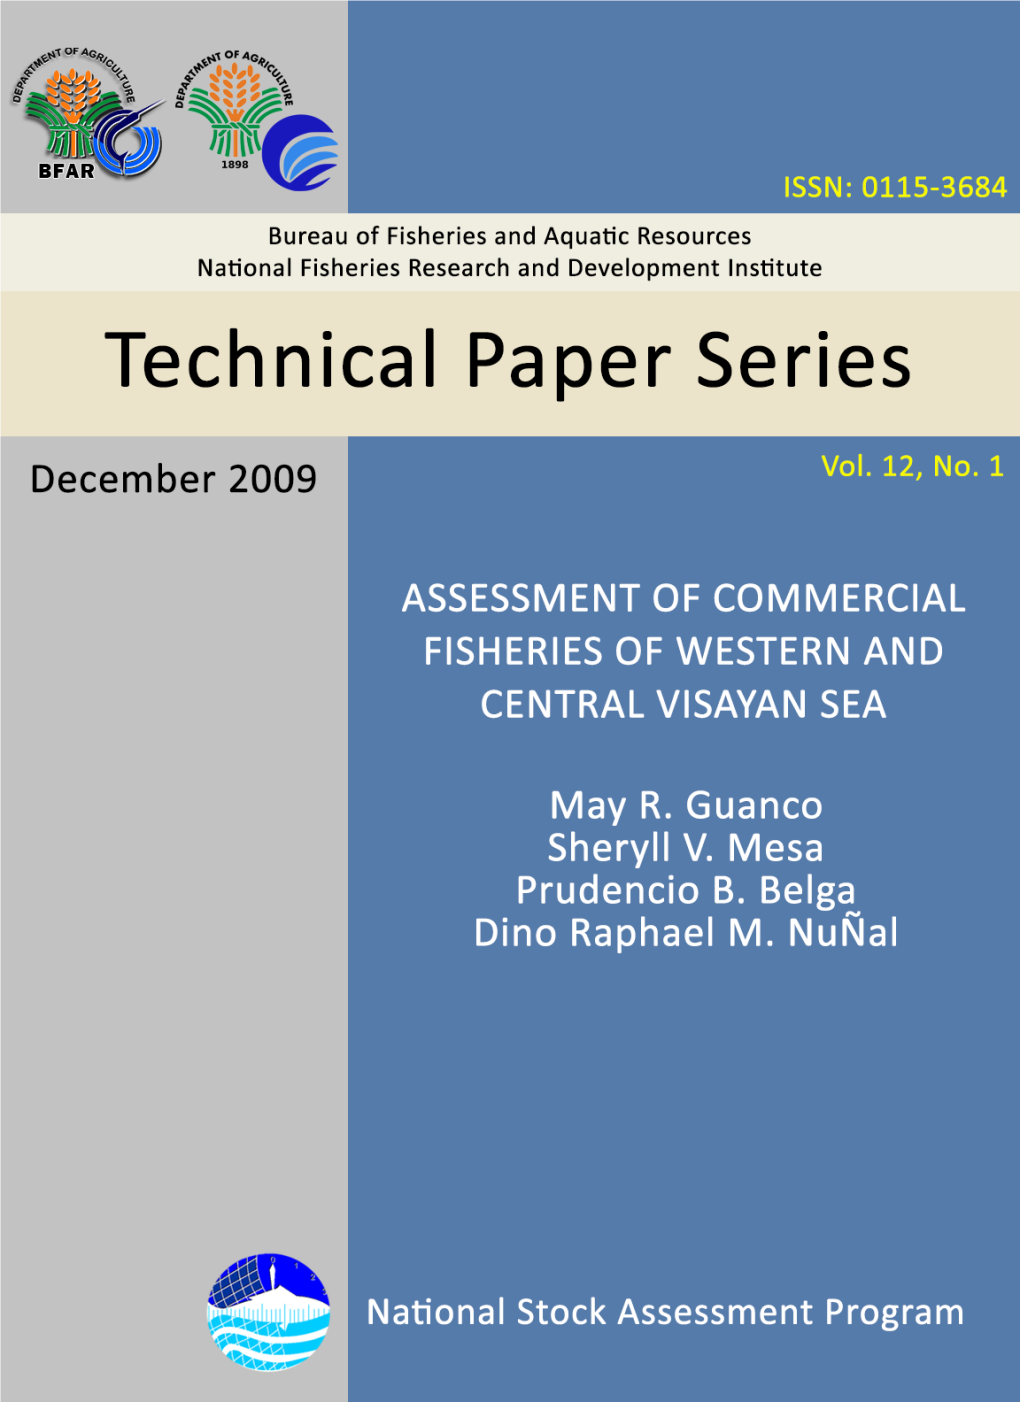 Assessment of Commercial Fisheries of Western and Central Visayan